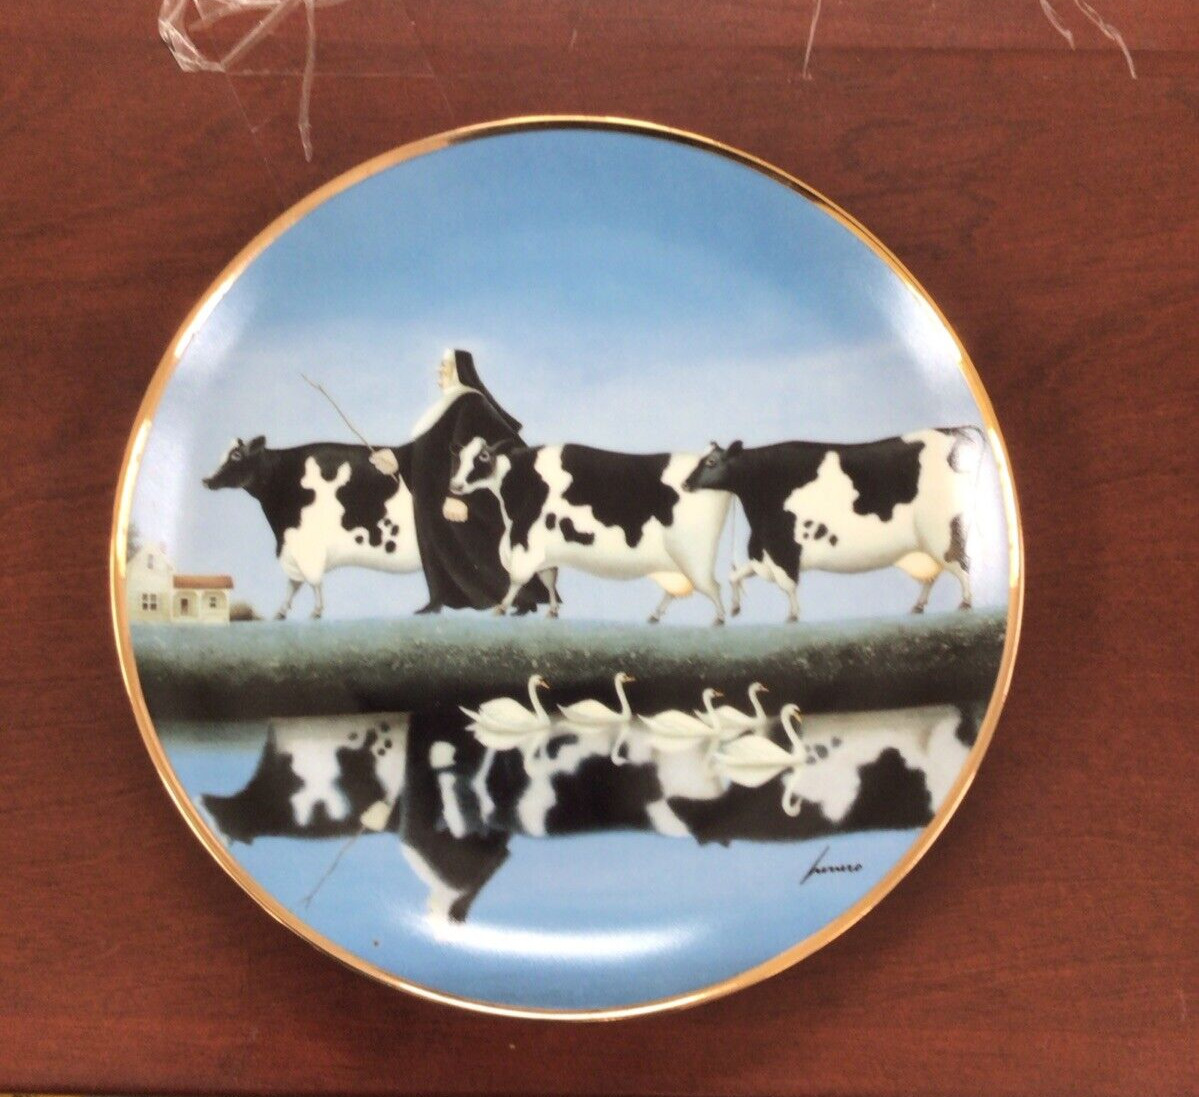 Franklin Mint Limited Edition Porcelain Plate Follow the Leader, RA1179